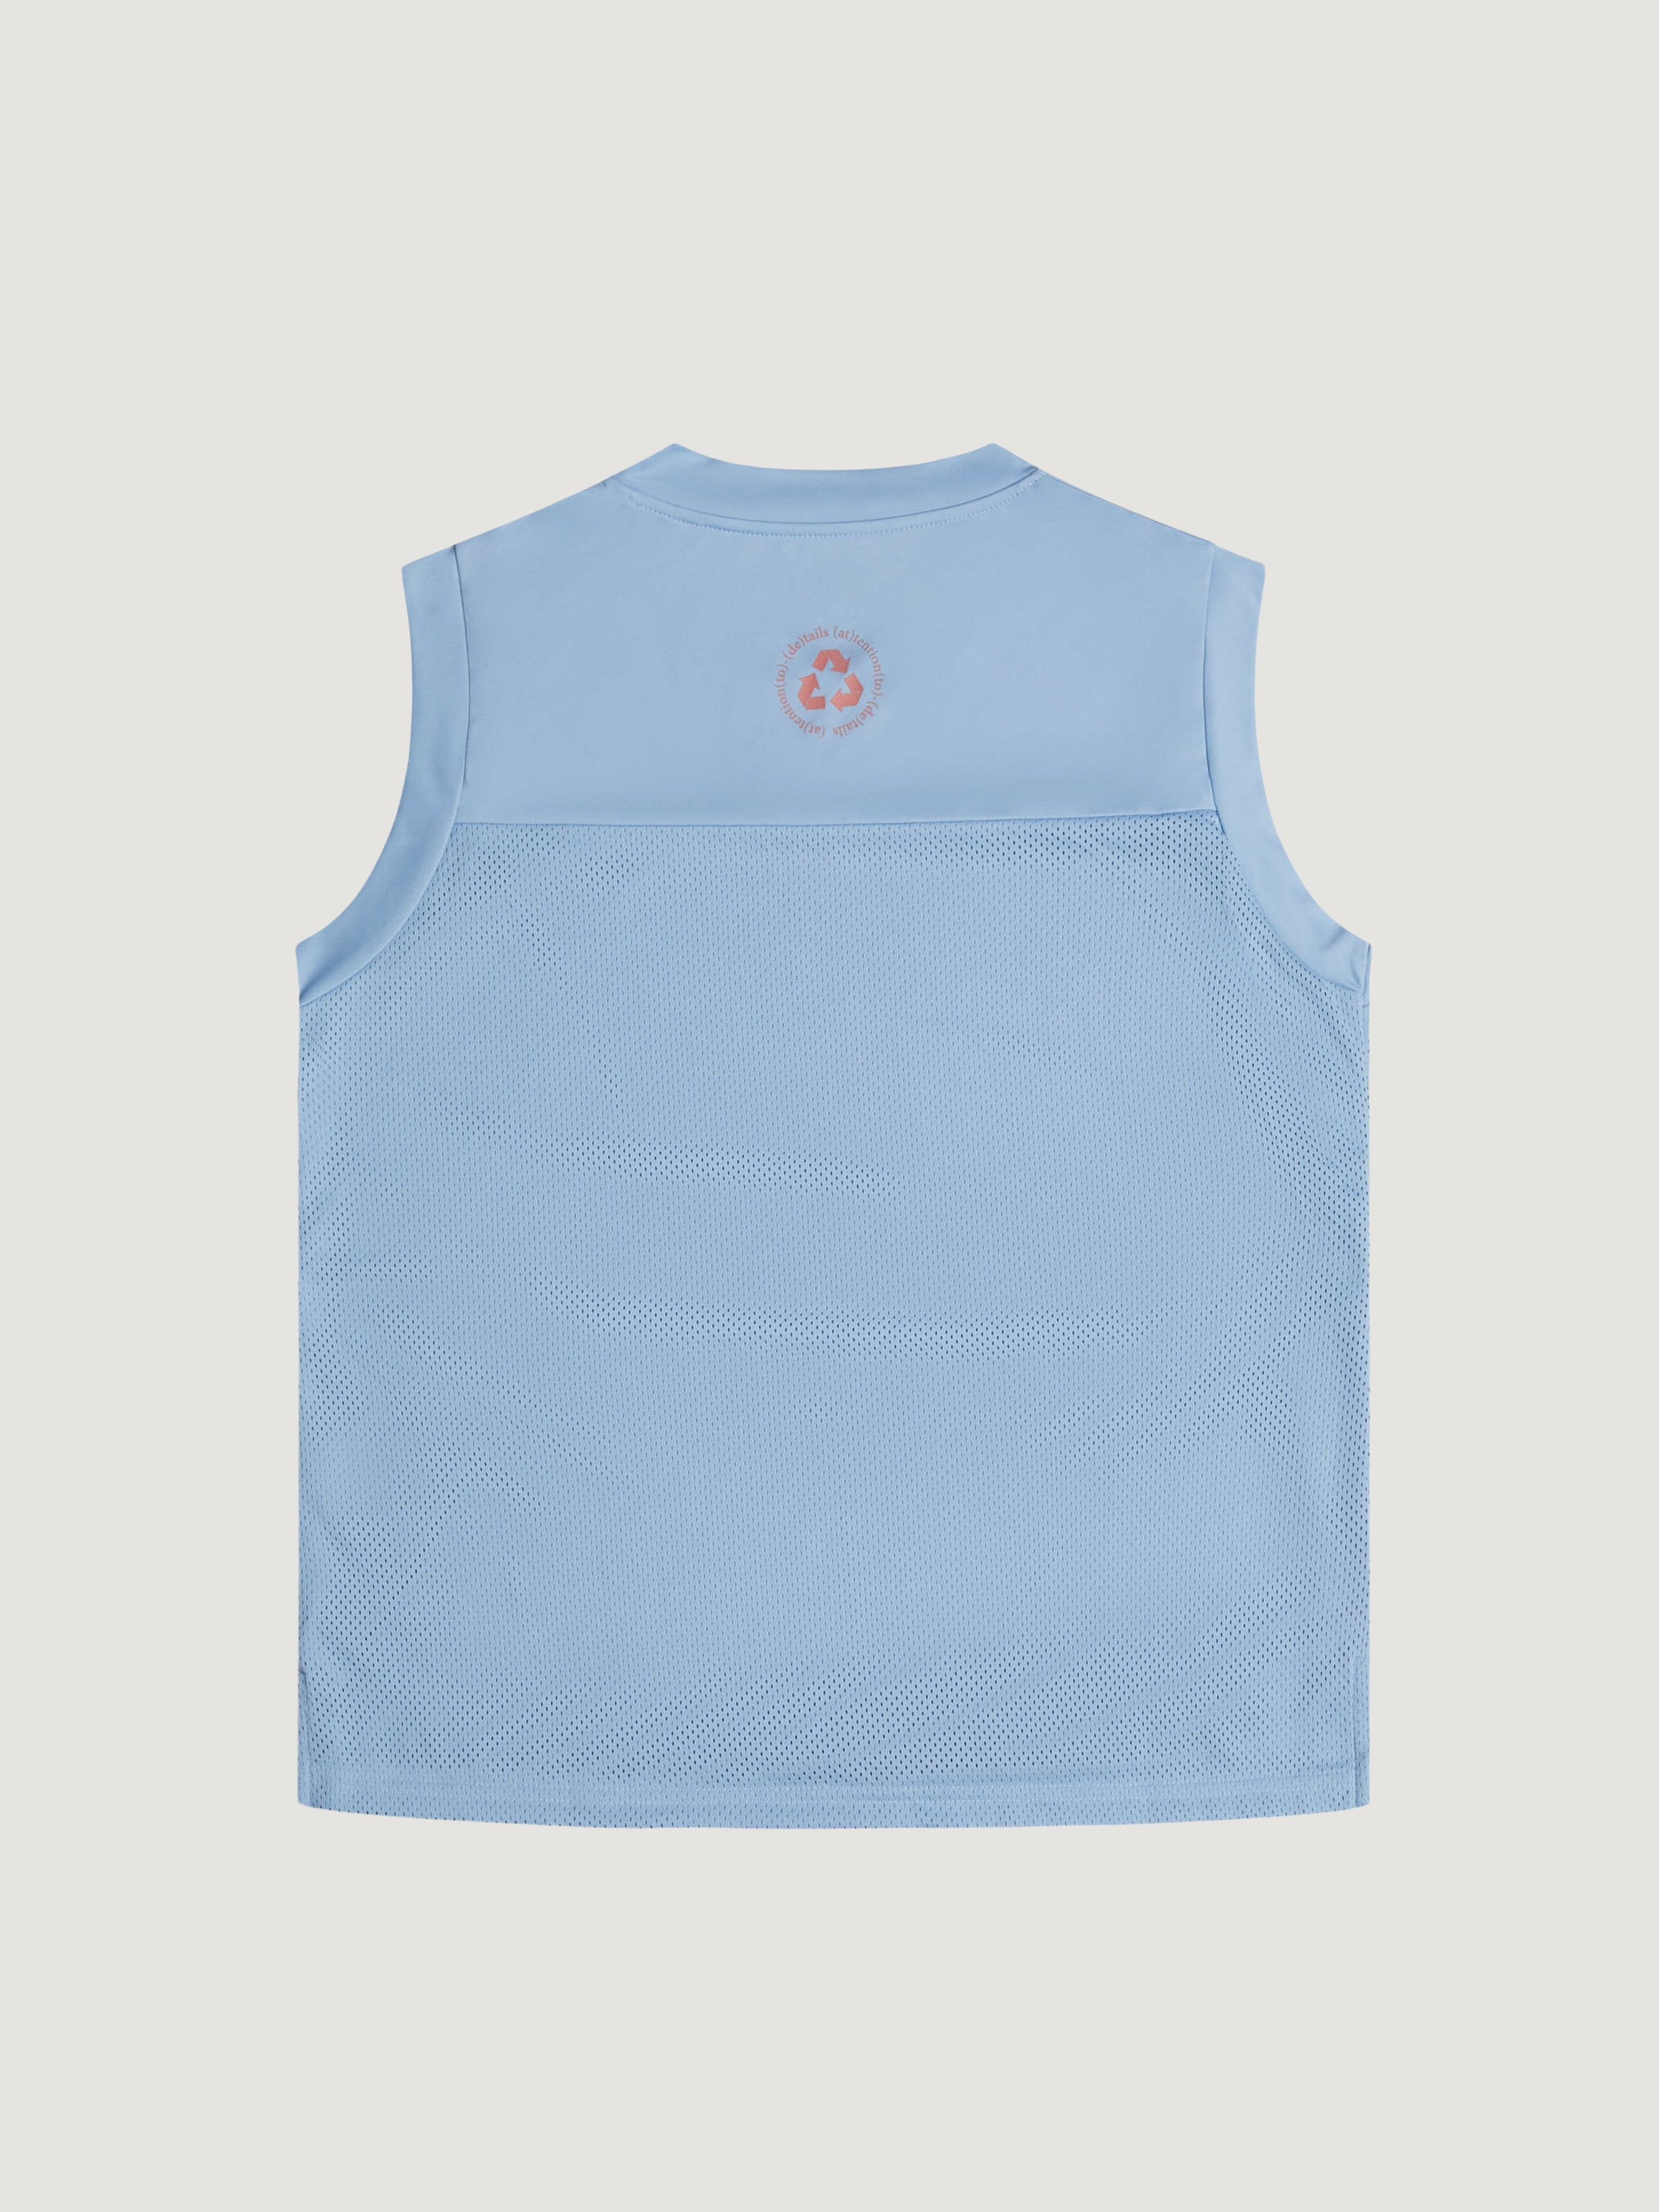 CASUAL SPORTS TANK TOP BABY BLUE - ATTODE